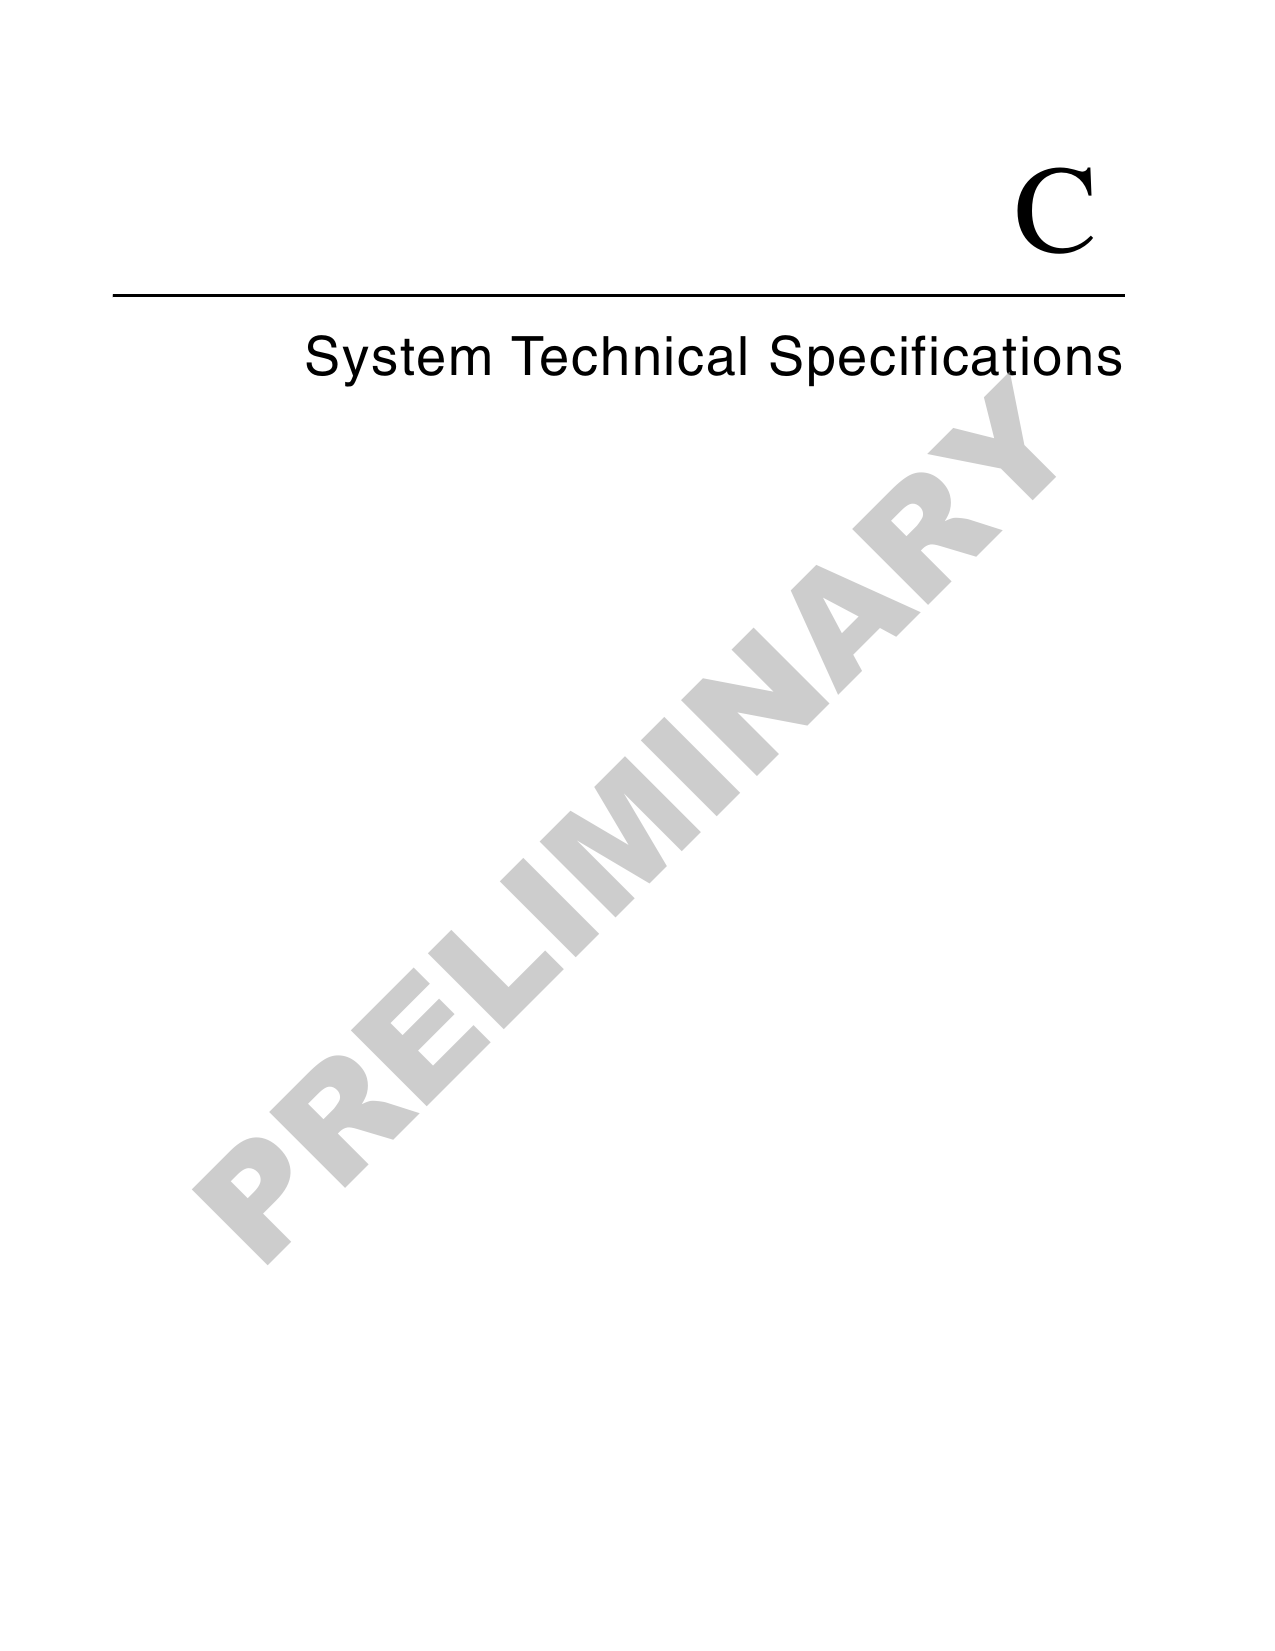 CSystem Technical SpecificationsPRELIMINARY